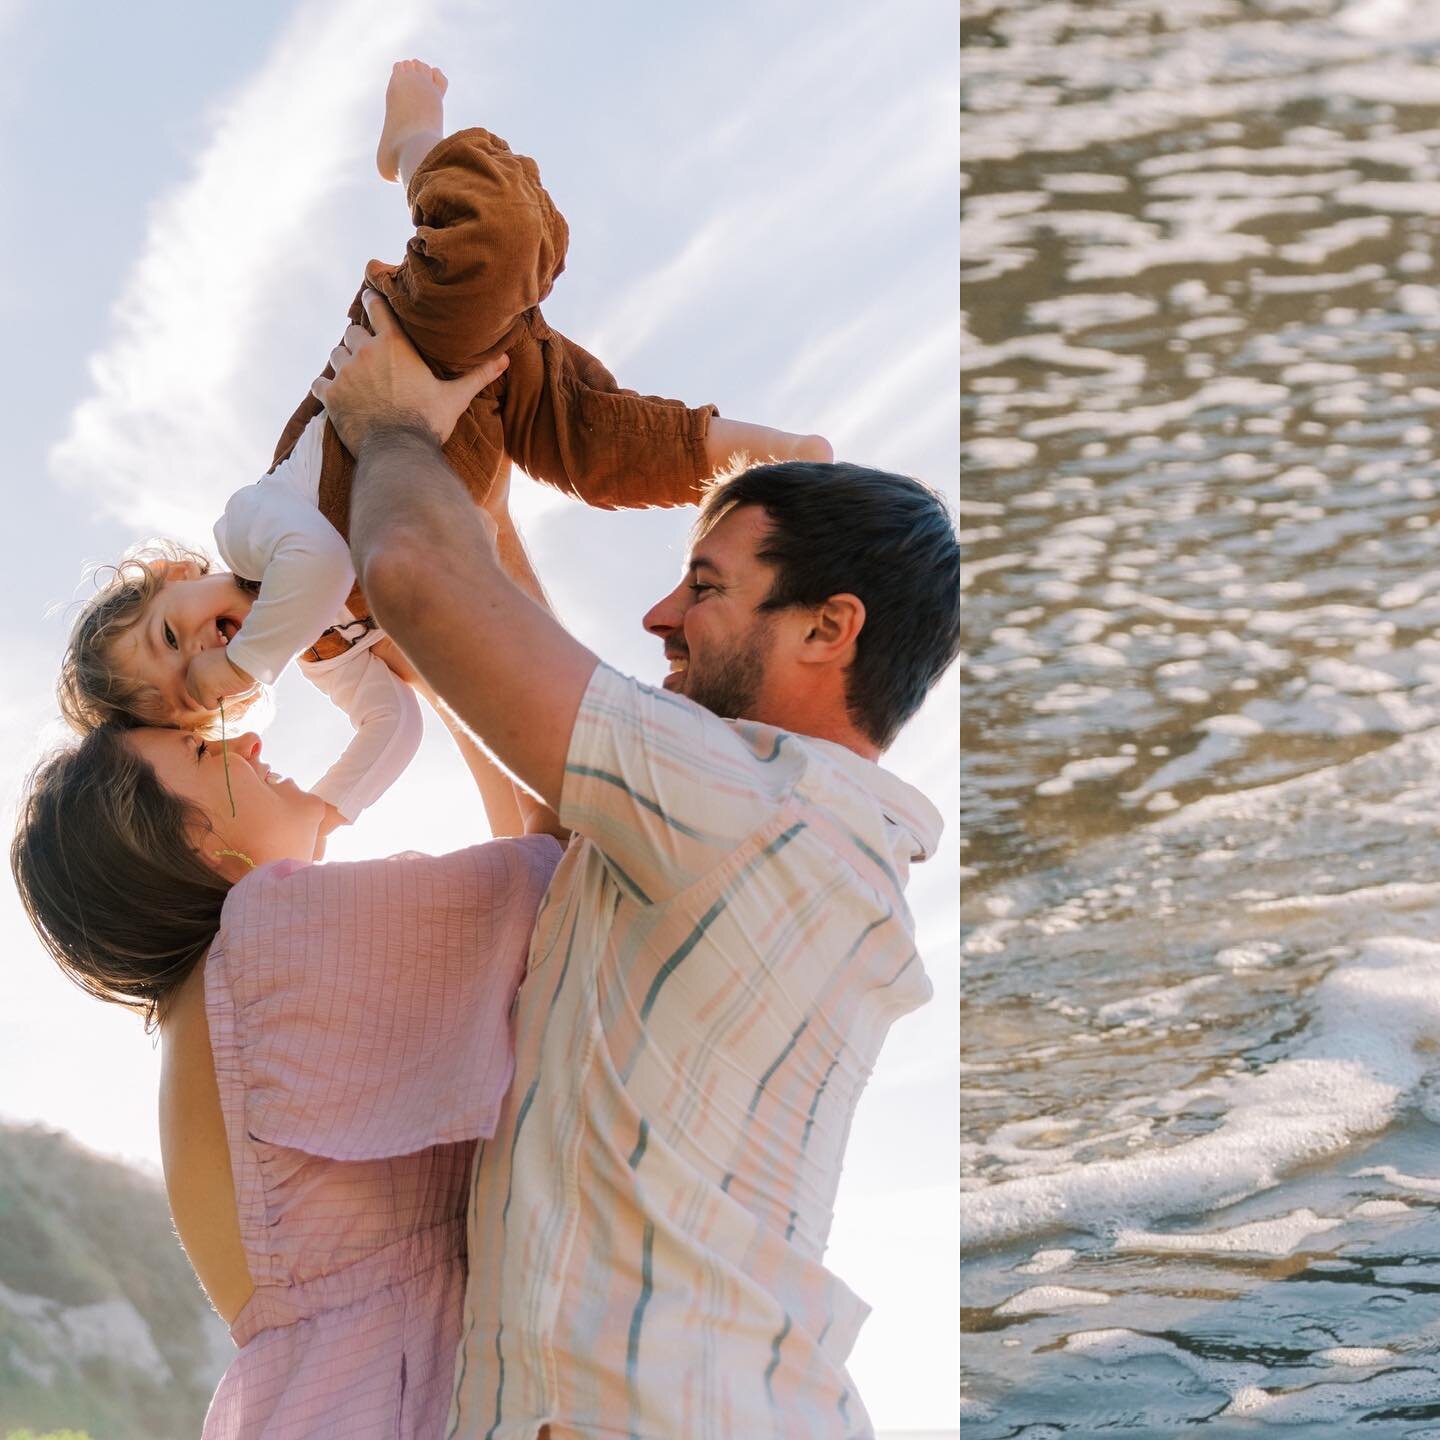 It&rsquo;s so difficult finding which images to post! I stared at these for 30 minutes before finally deciding. So many beautiful moments from this beach session with the Polk family ⭐️ so lucky to live in SoCal where your winter/annual photos can be